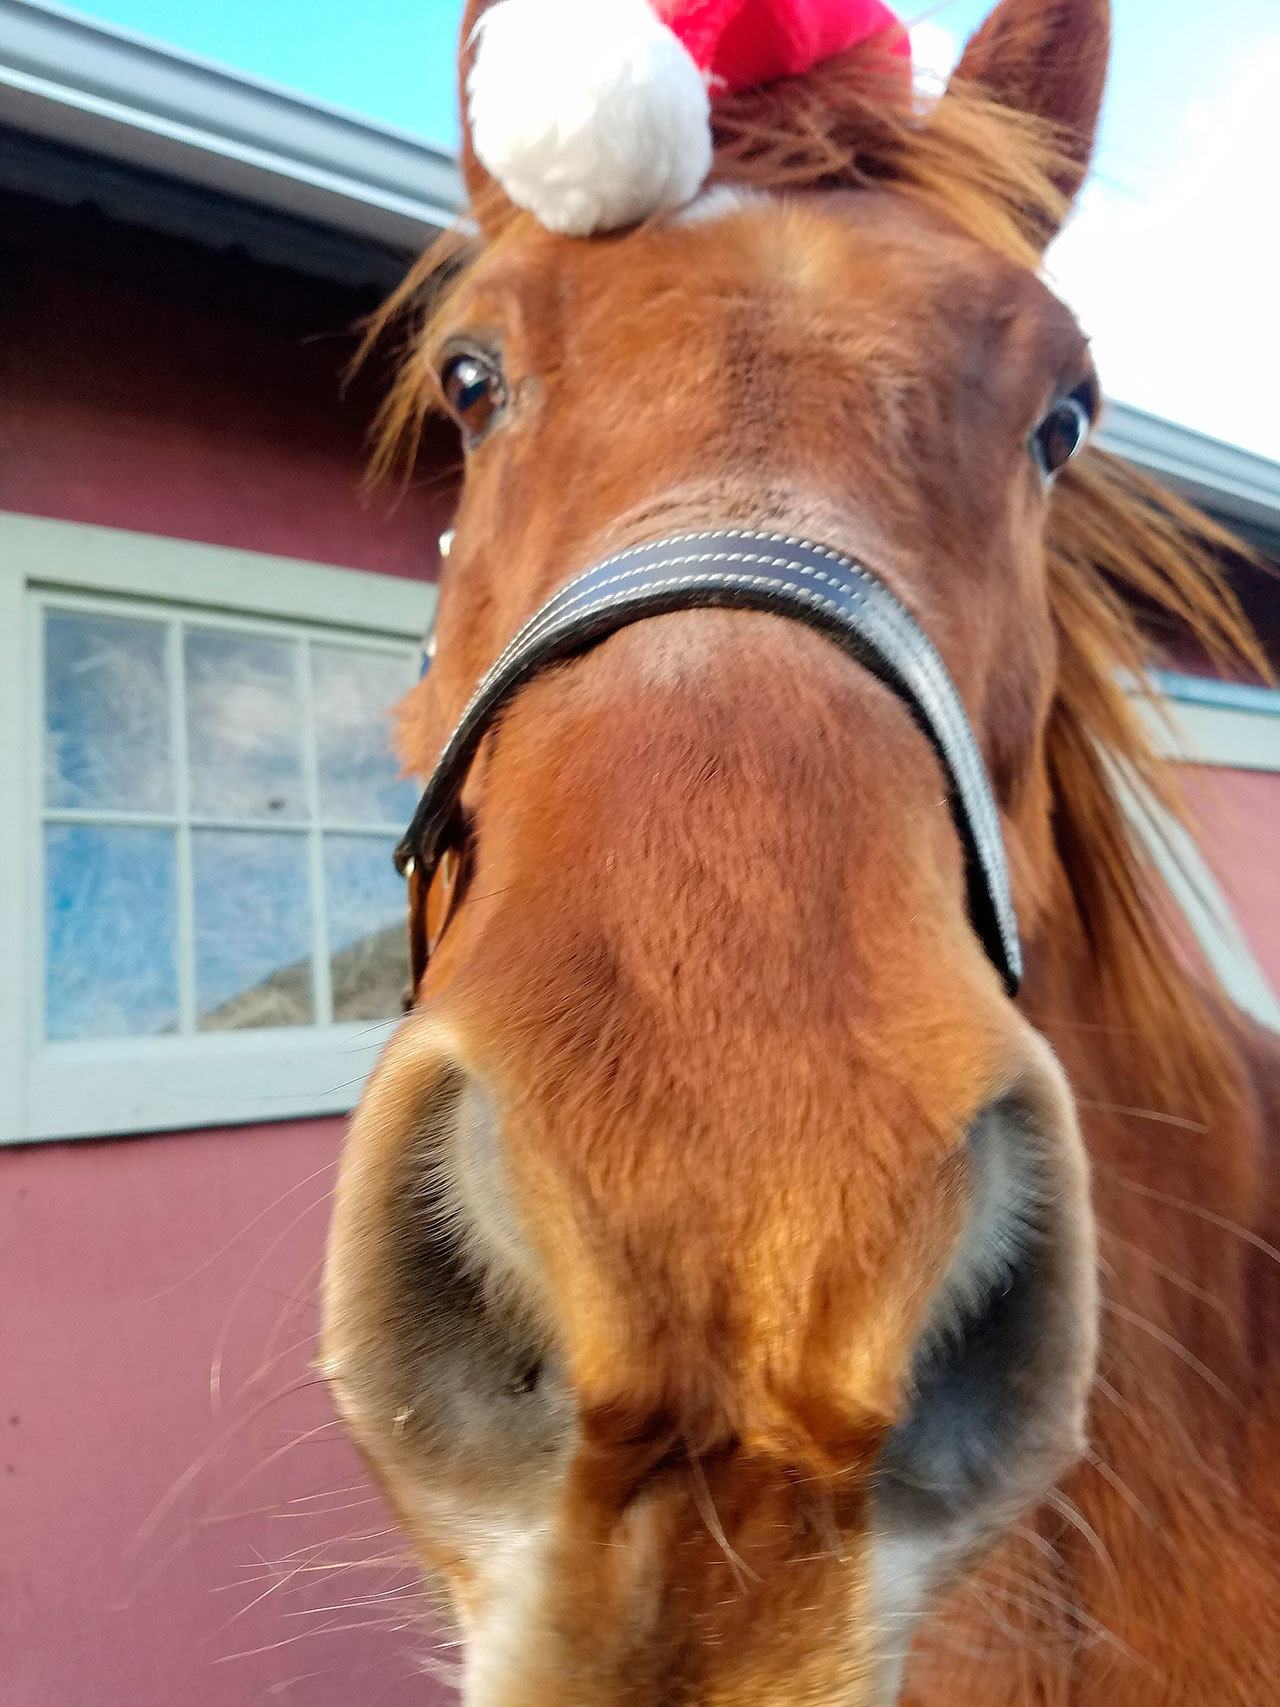 Big Boy is living at a foster home arranged through the Whidbey Island Farm Animal Assistance Program after his former owner agreed to give him up. Photo by Jenn Gravel.